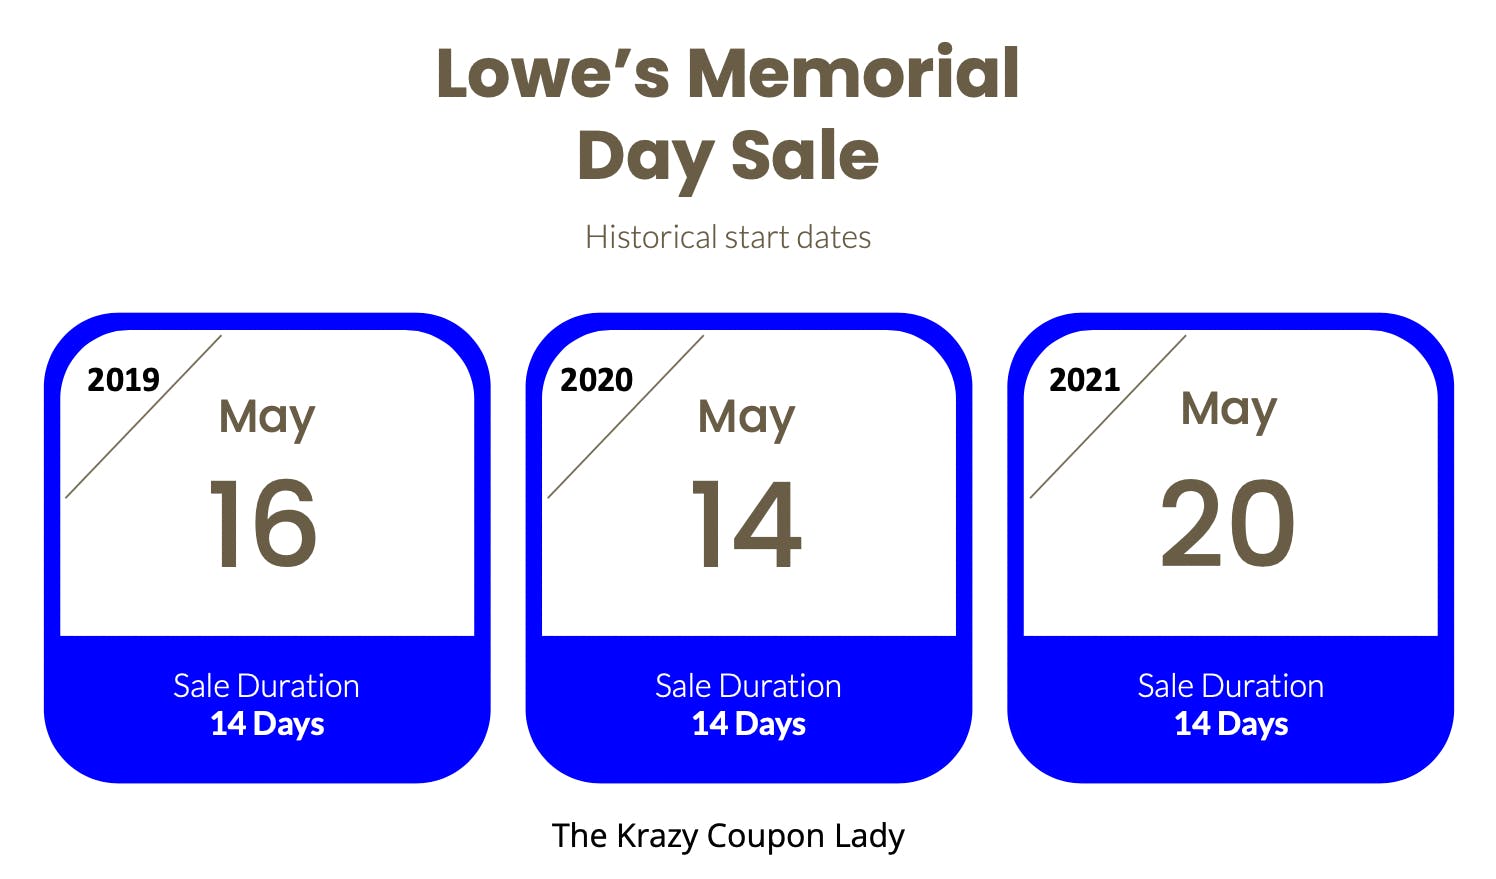 Graphic showing the start dates of each Lowe's Memorial Day sale in 2019, 2020, and 2021